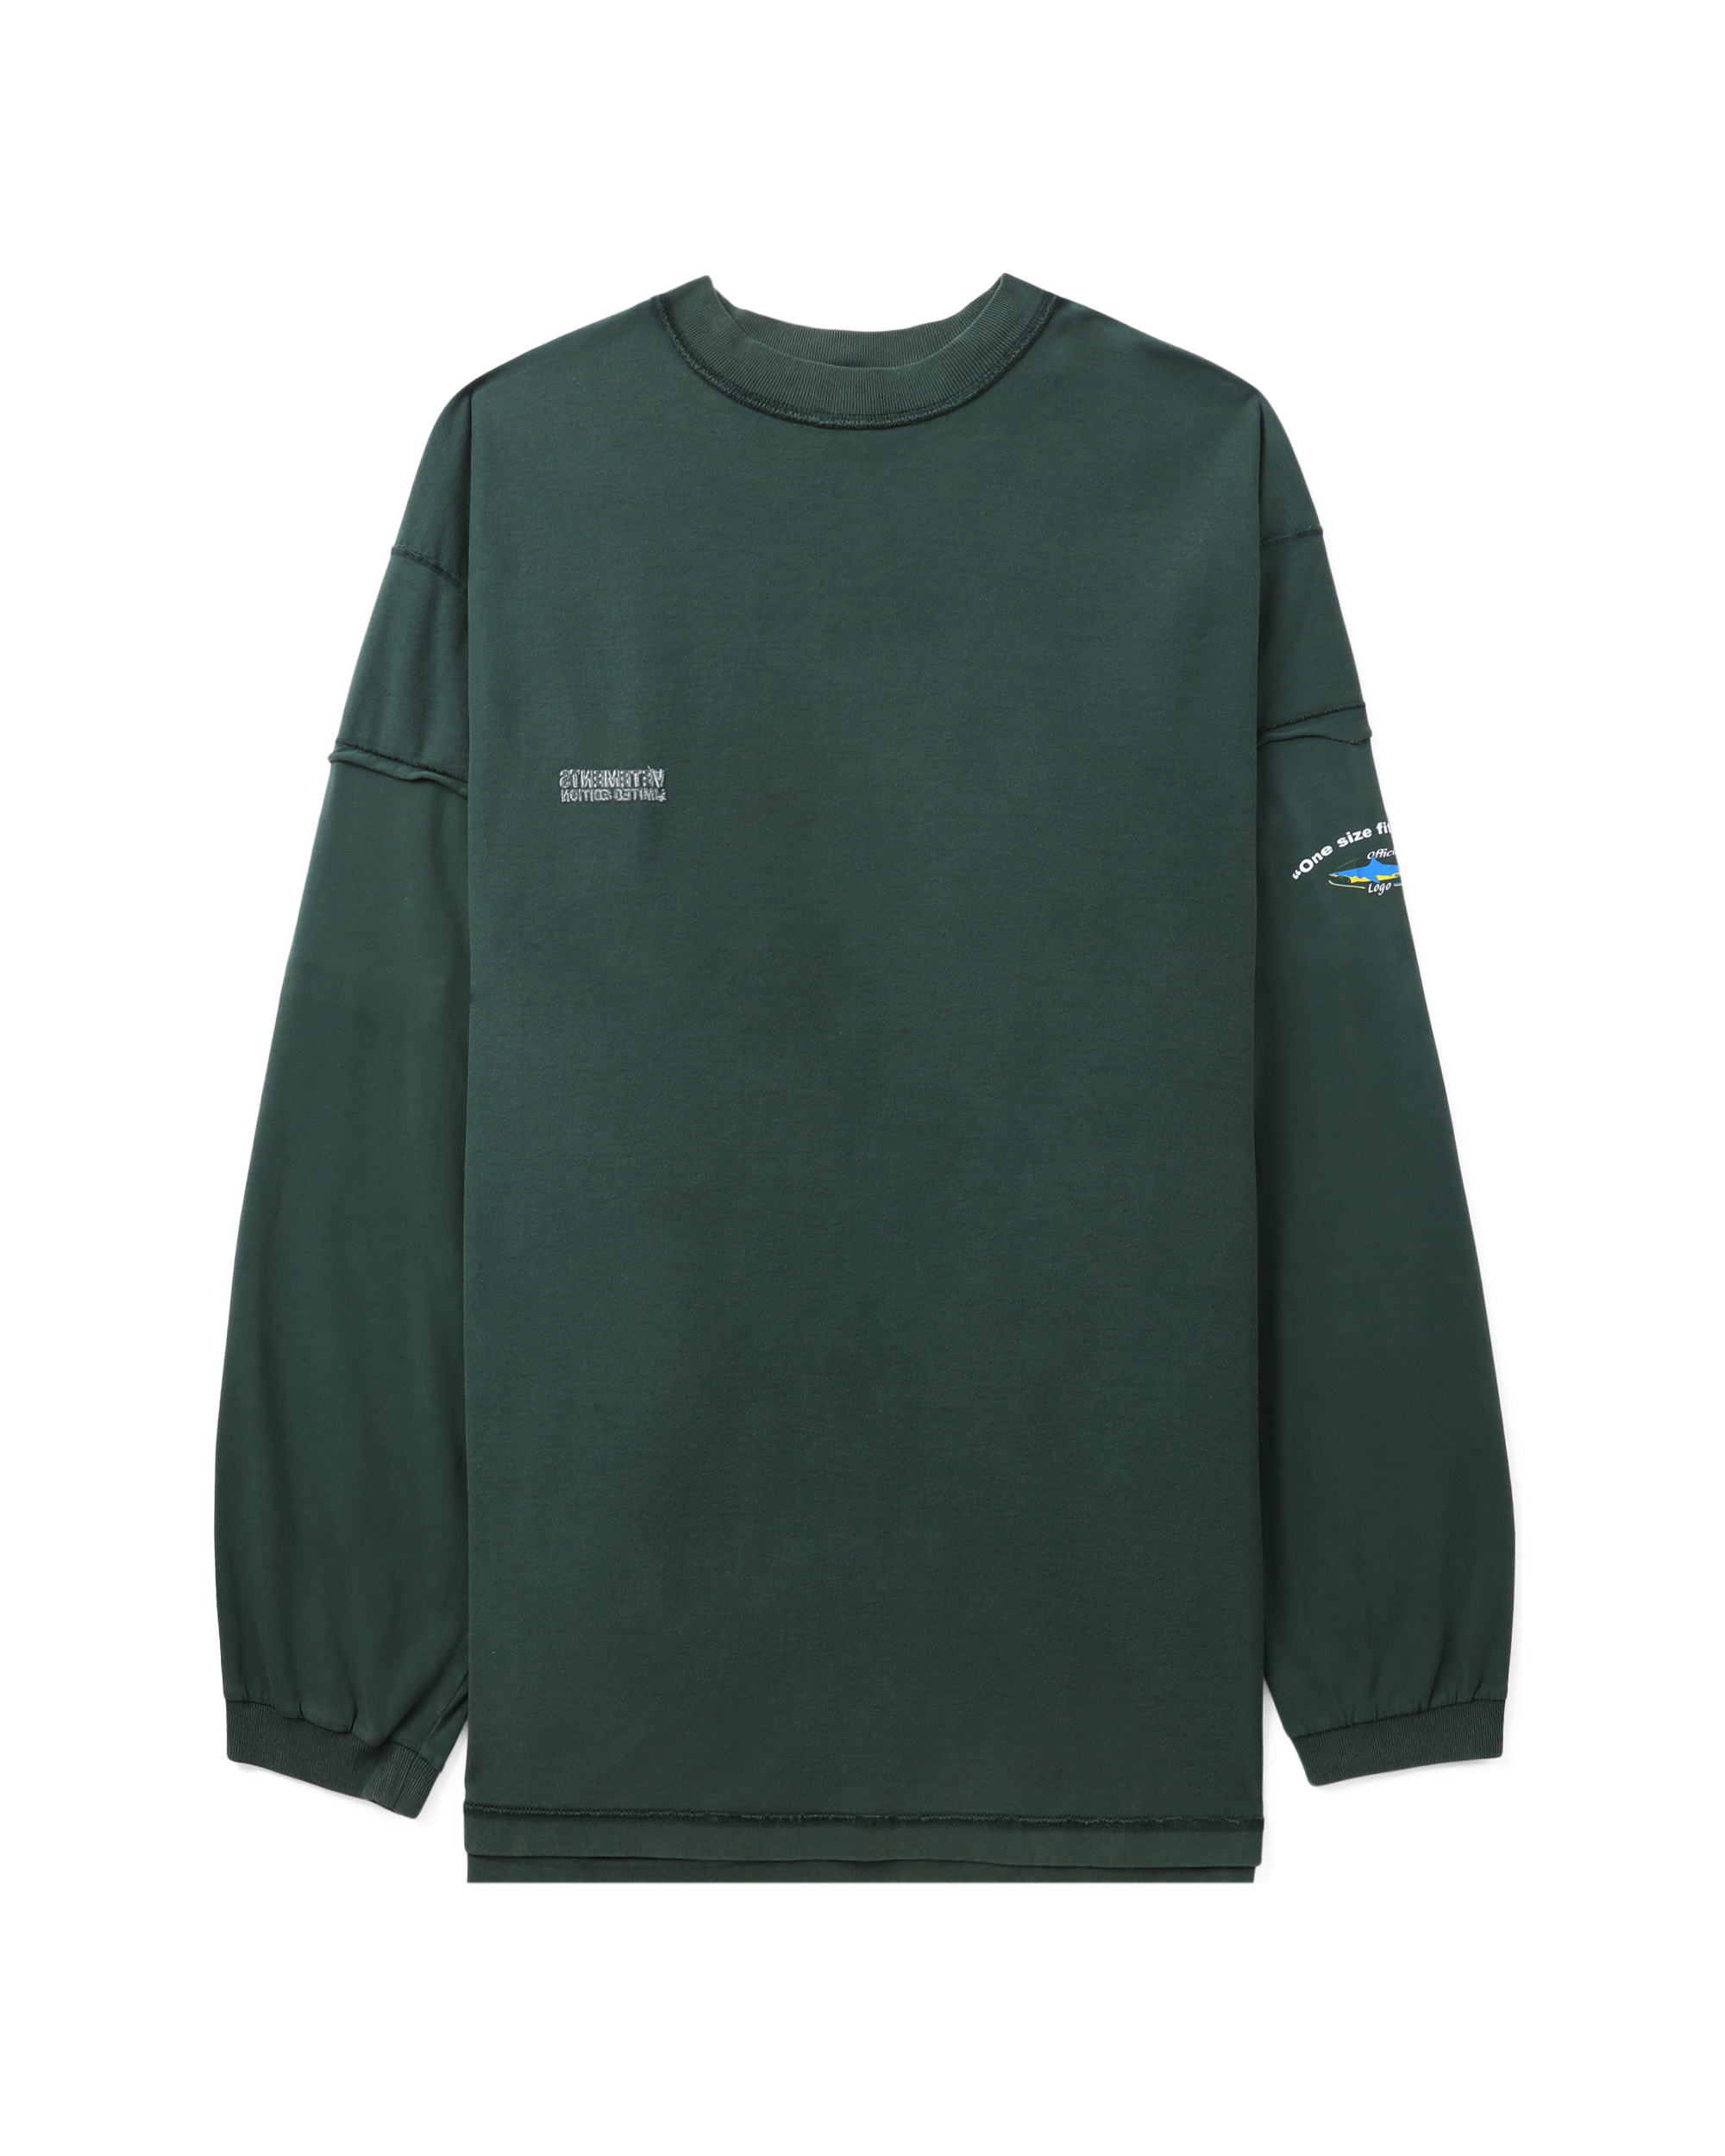 VETEMENTS Inside-out long-sleeve tee| ITeSHOP